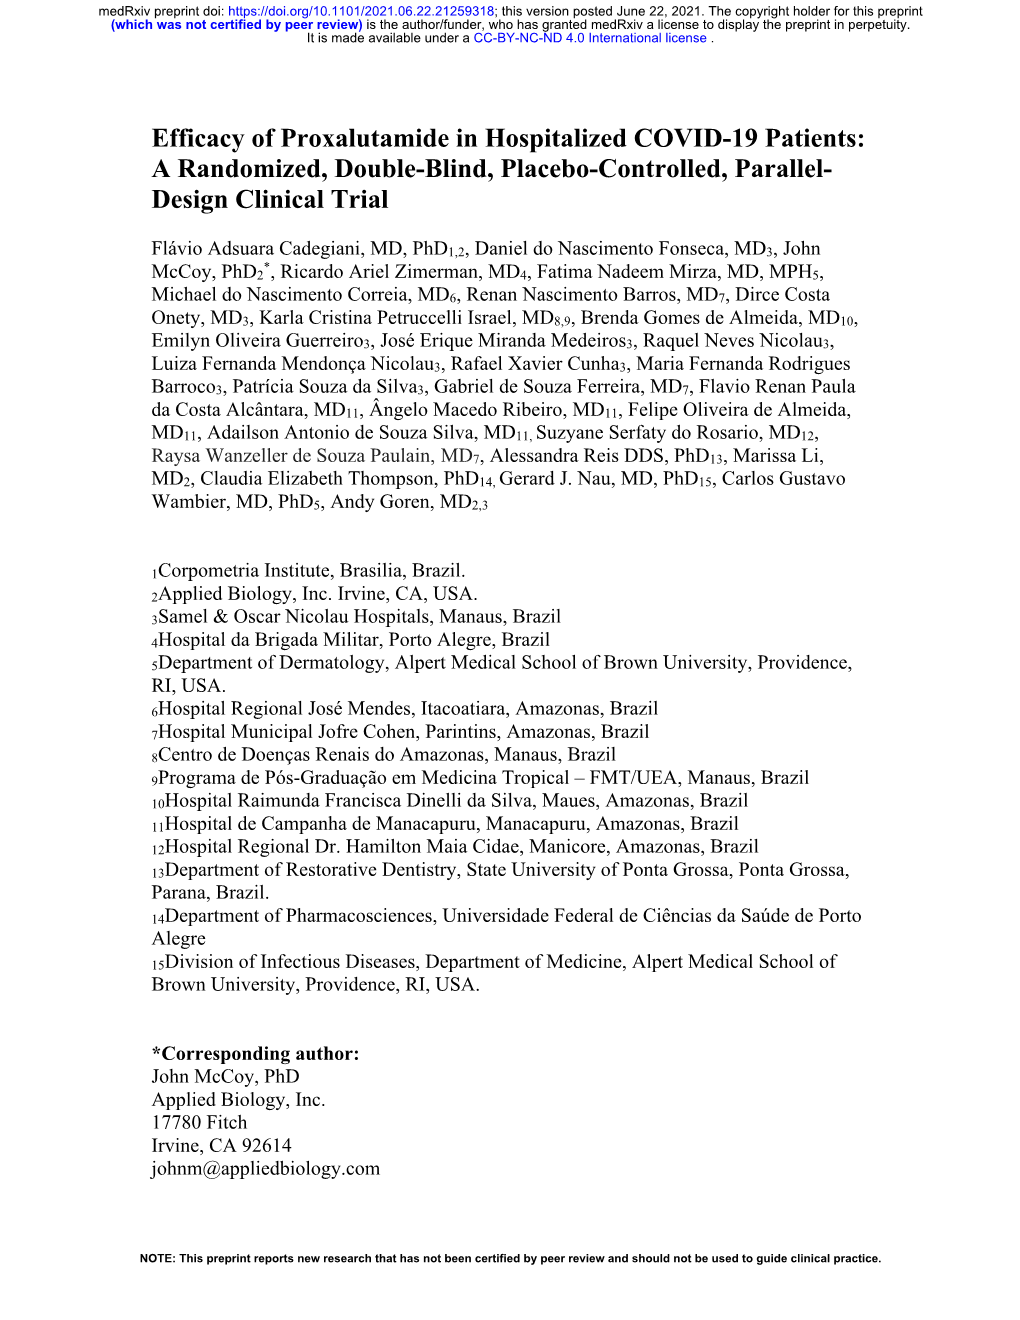 Efficacy of Proxalutamide in Hospitalized COVID-19 Patients: a Randomized, Double-Blind, Placebo-Controlled, Parallel- Design Clinical Trial